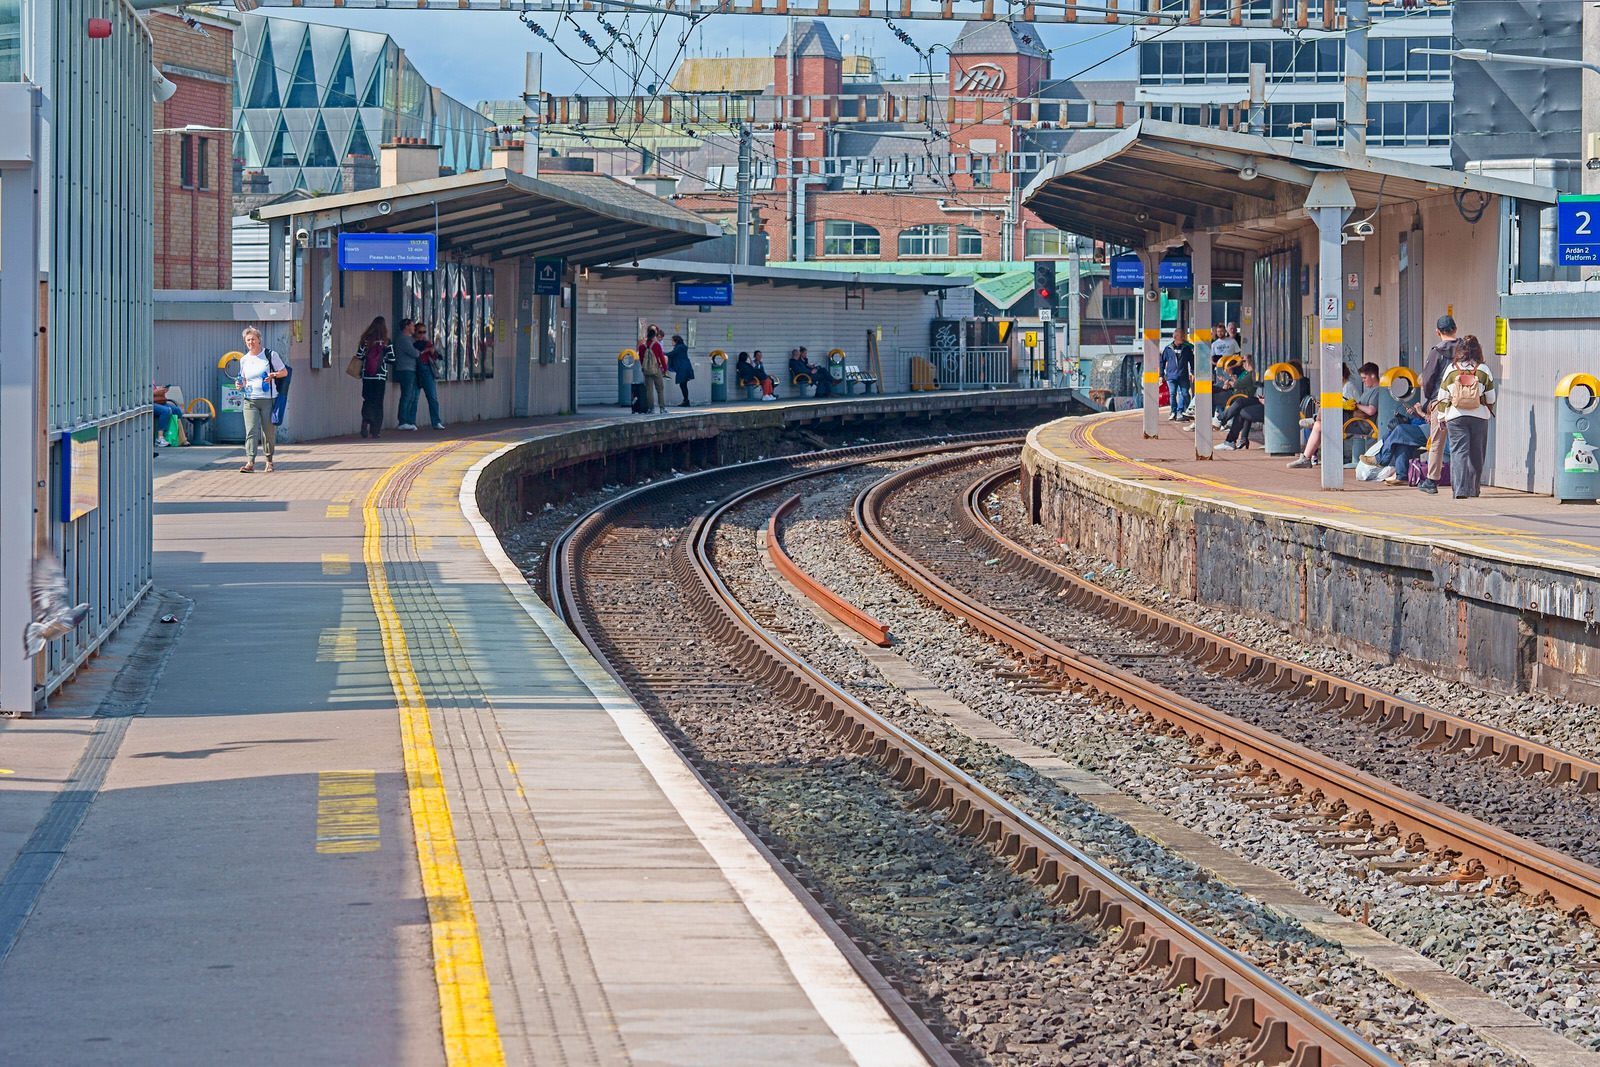 COMPRESSED VIEWS OF TARA STREET TRAIN STATION [I USED THE EQUIVALENT OF A 130MM LENS] 004